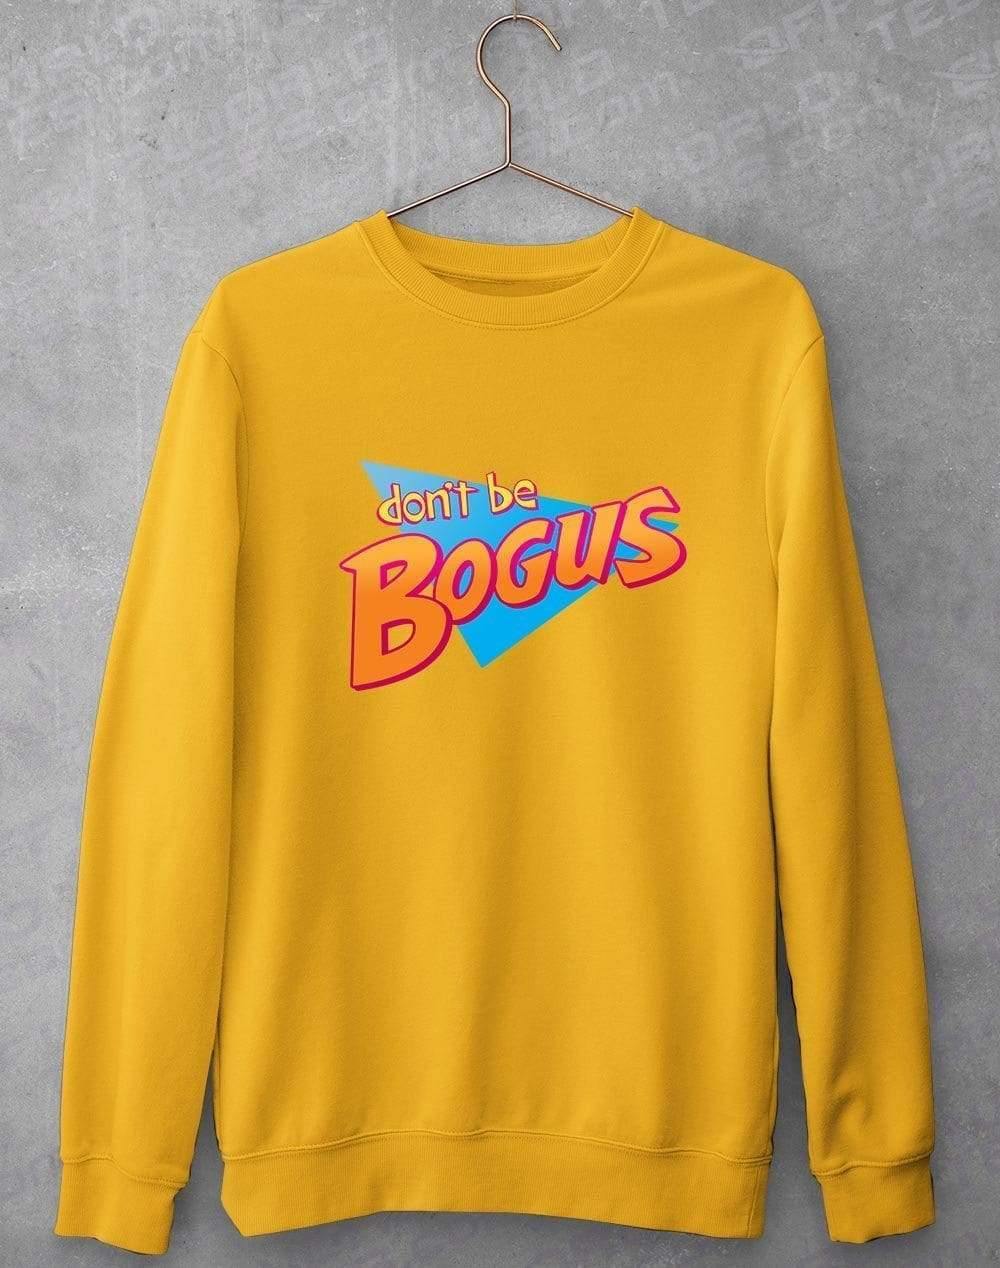 Dont be Bogus Sweatshirt S / Gold  - Off World Tees